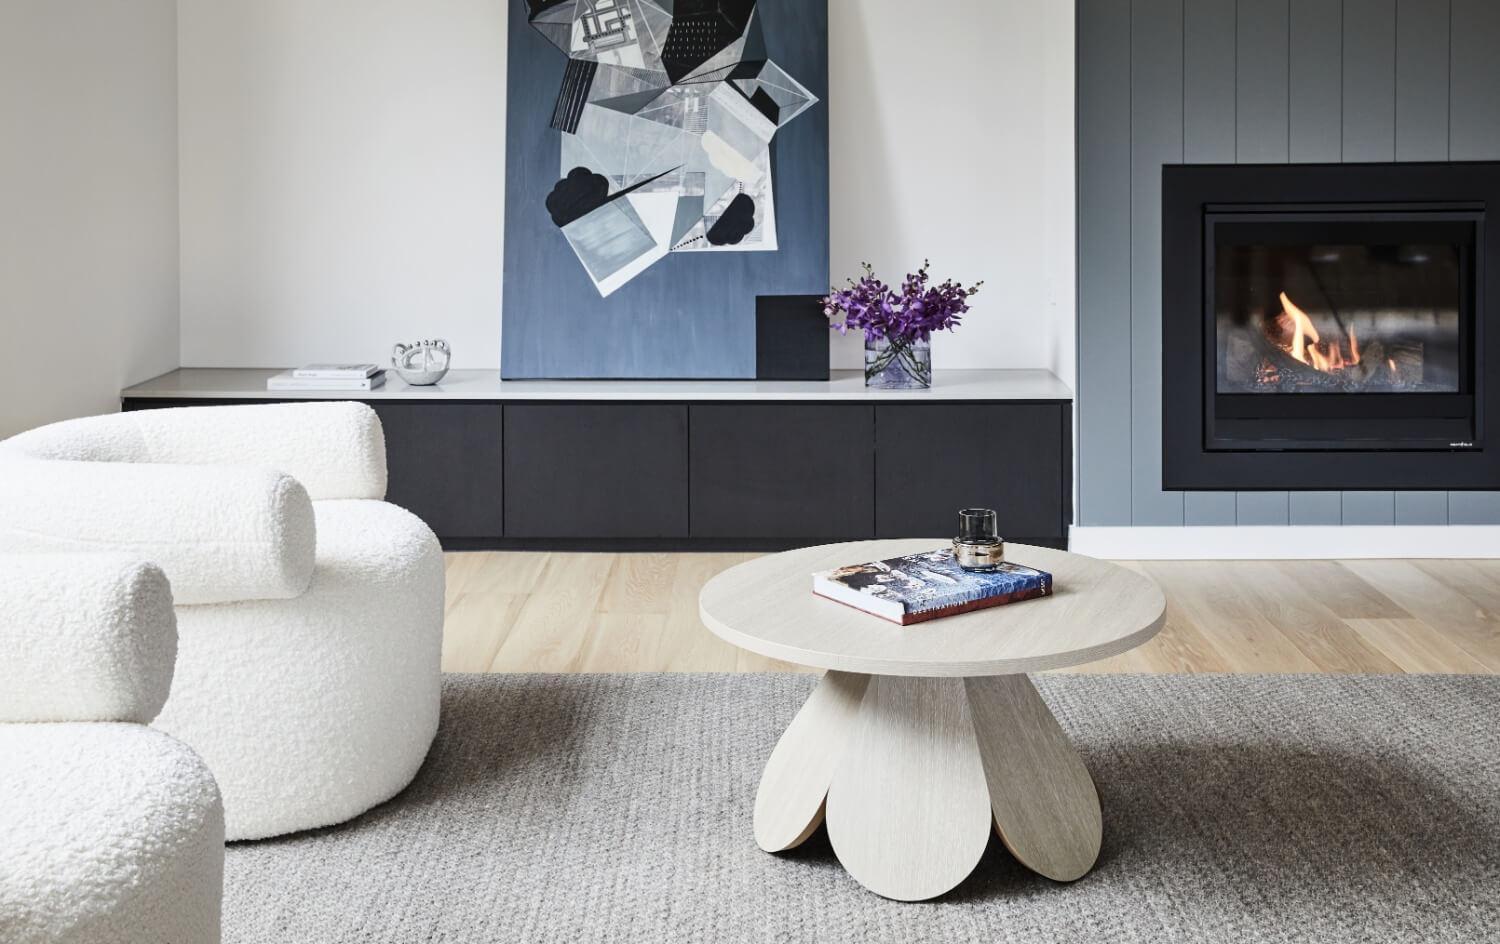 Contemporary White Furniture Adds Contrast To Dark Material Selection